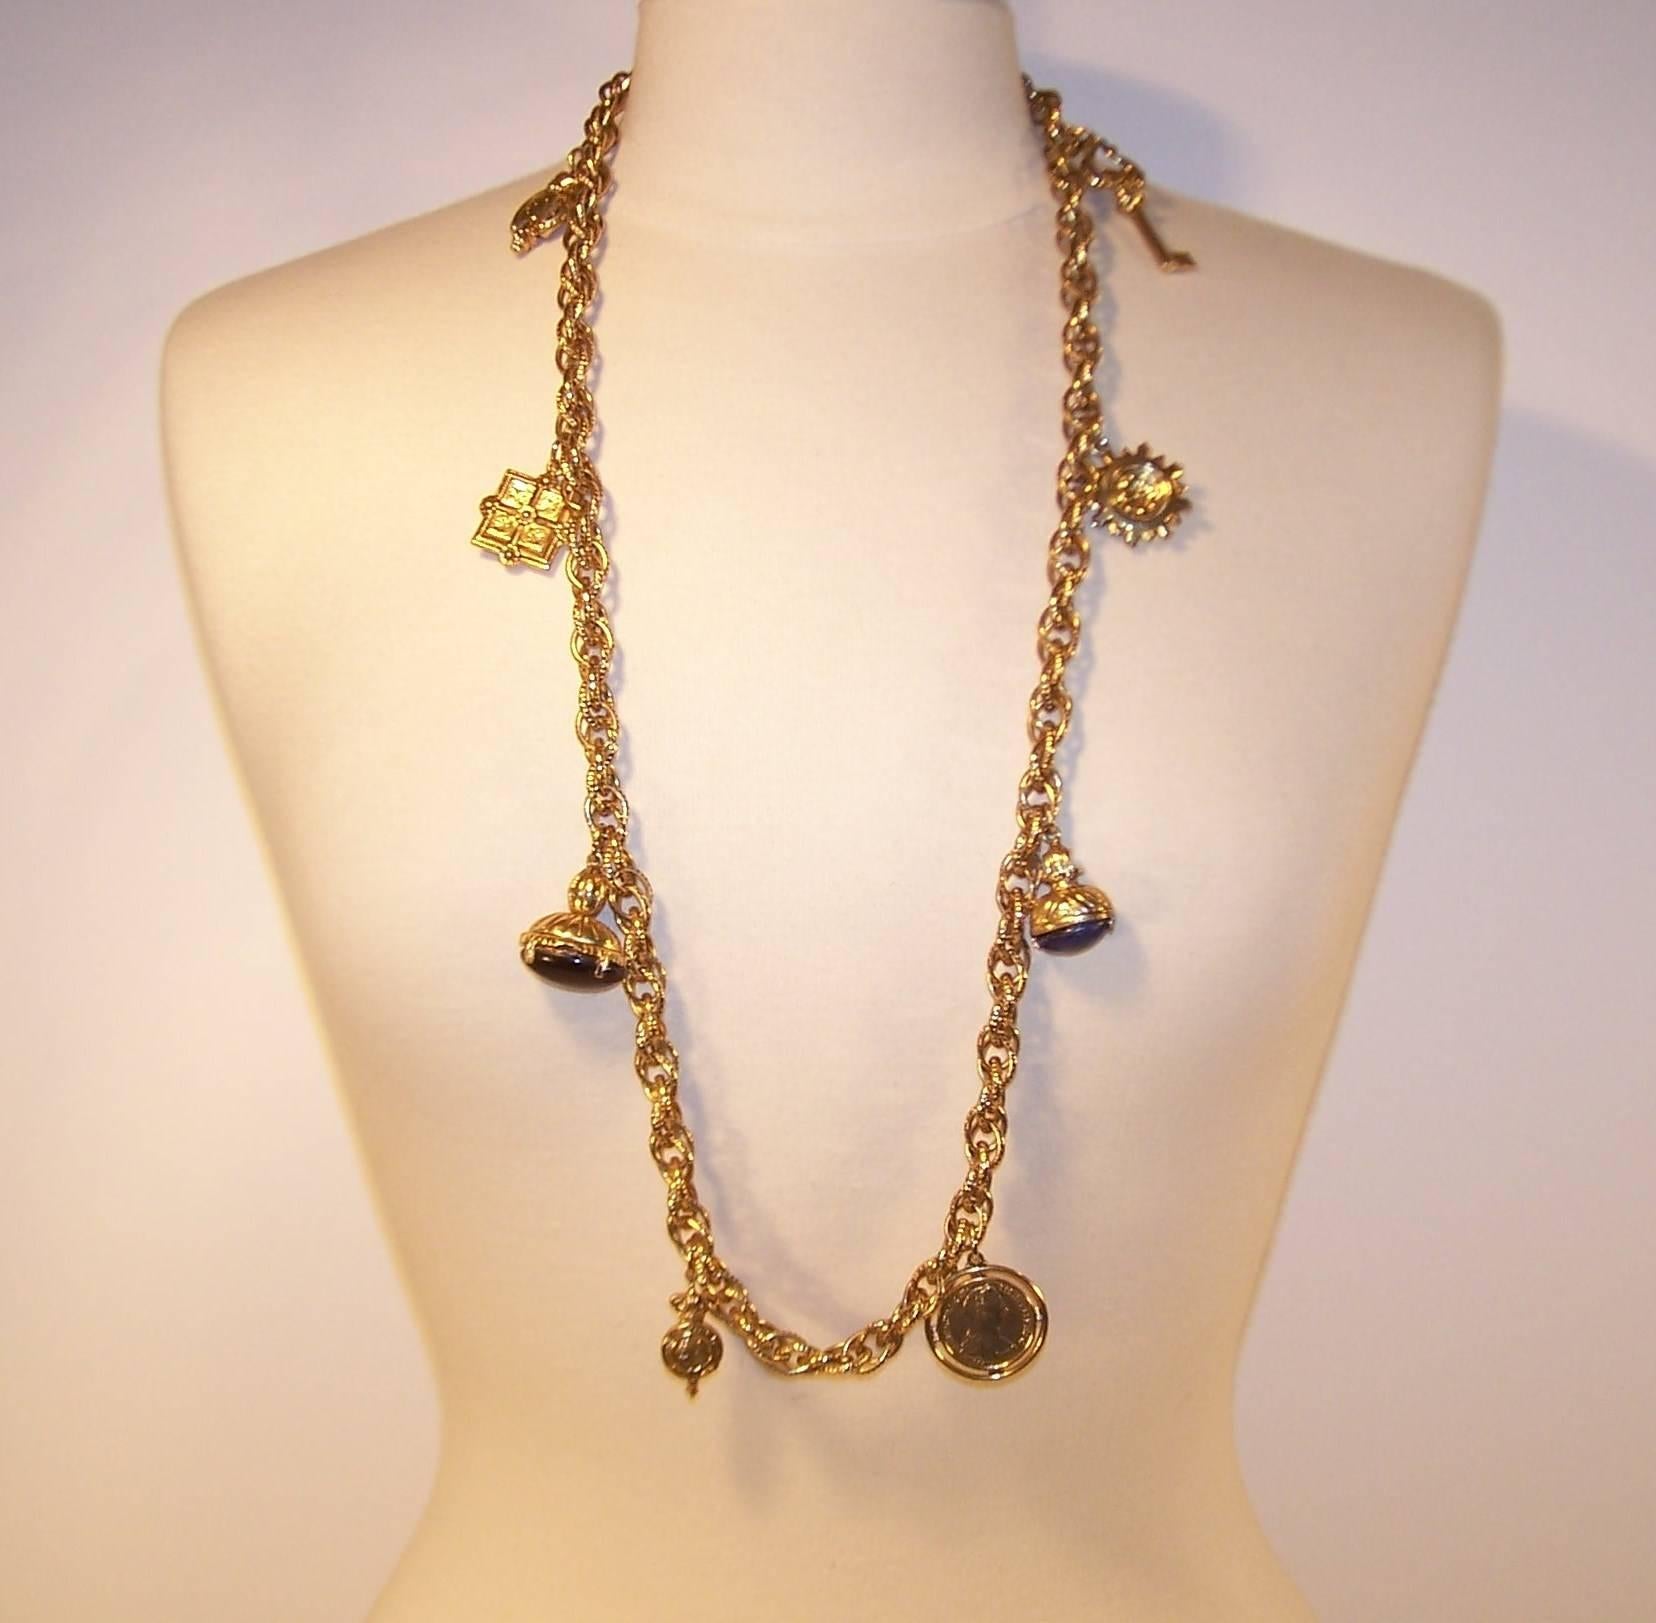 Victorian 1980's Gold Tone Charm Necklace With Rope Style Chain 